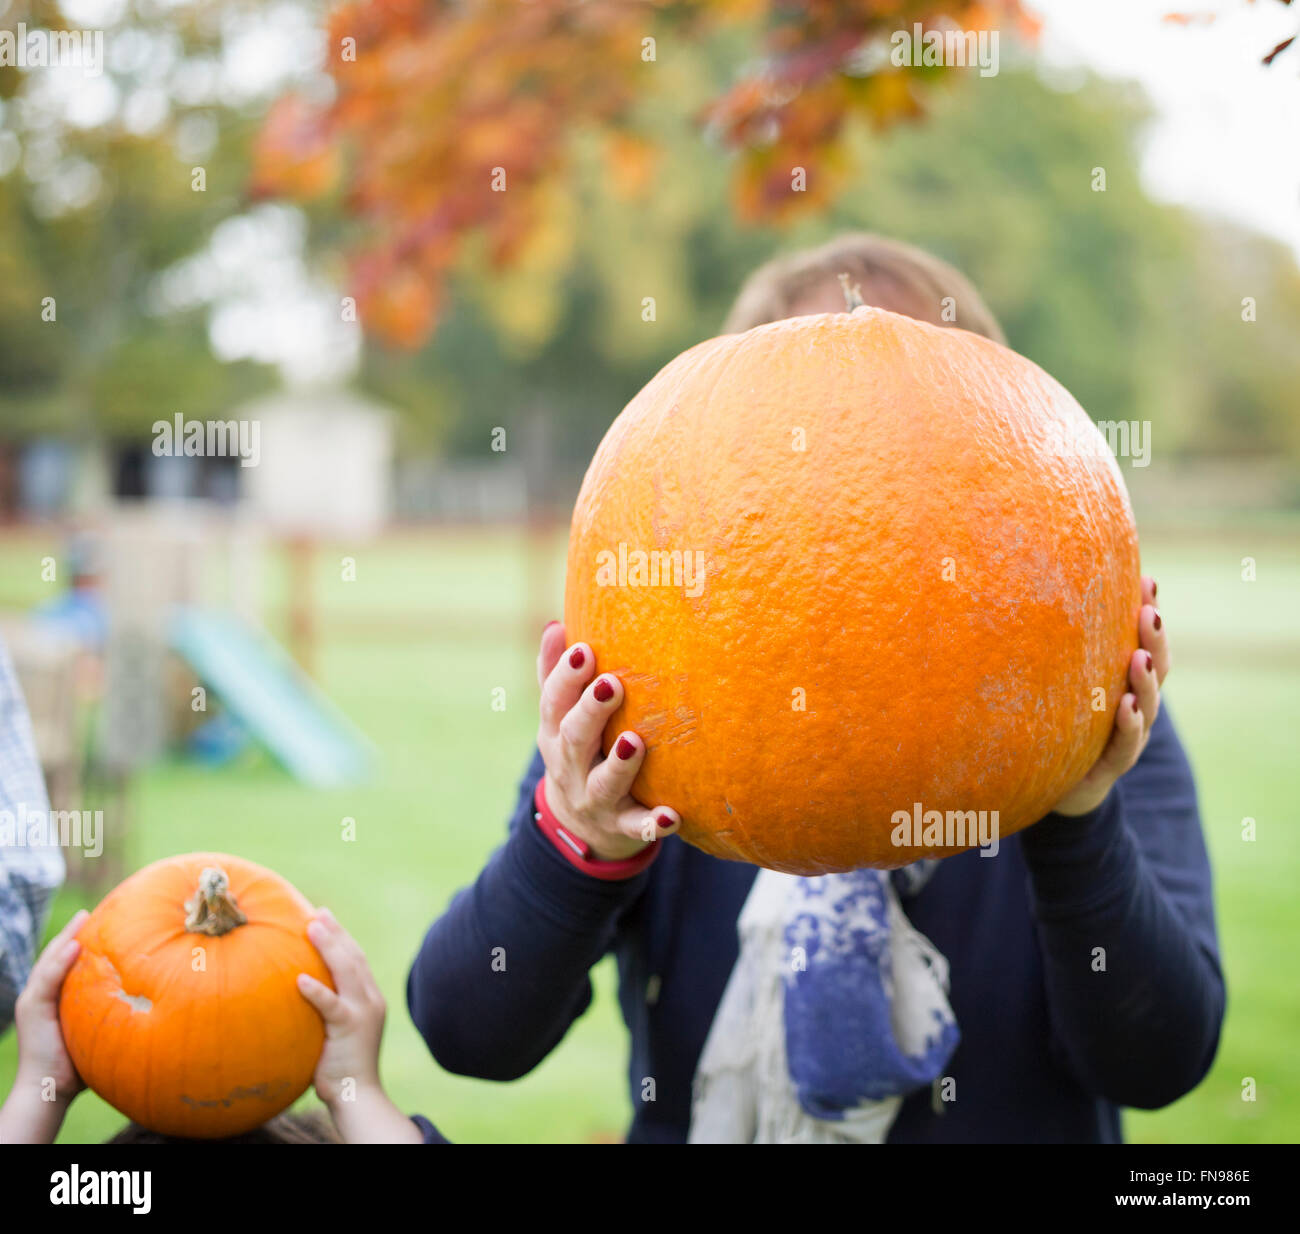 A woman and a child holding pumpkins in front of their faces. Stock Photo